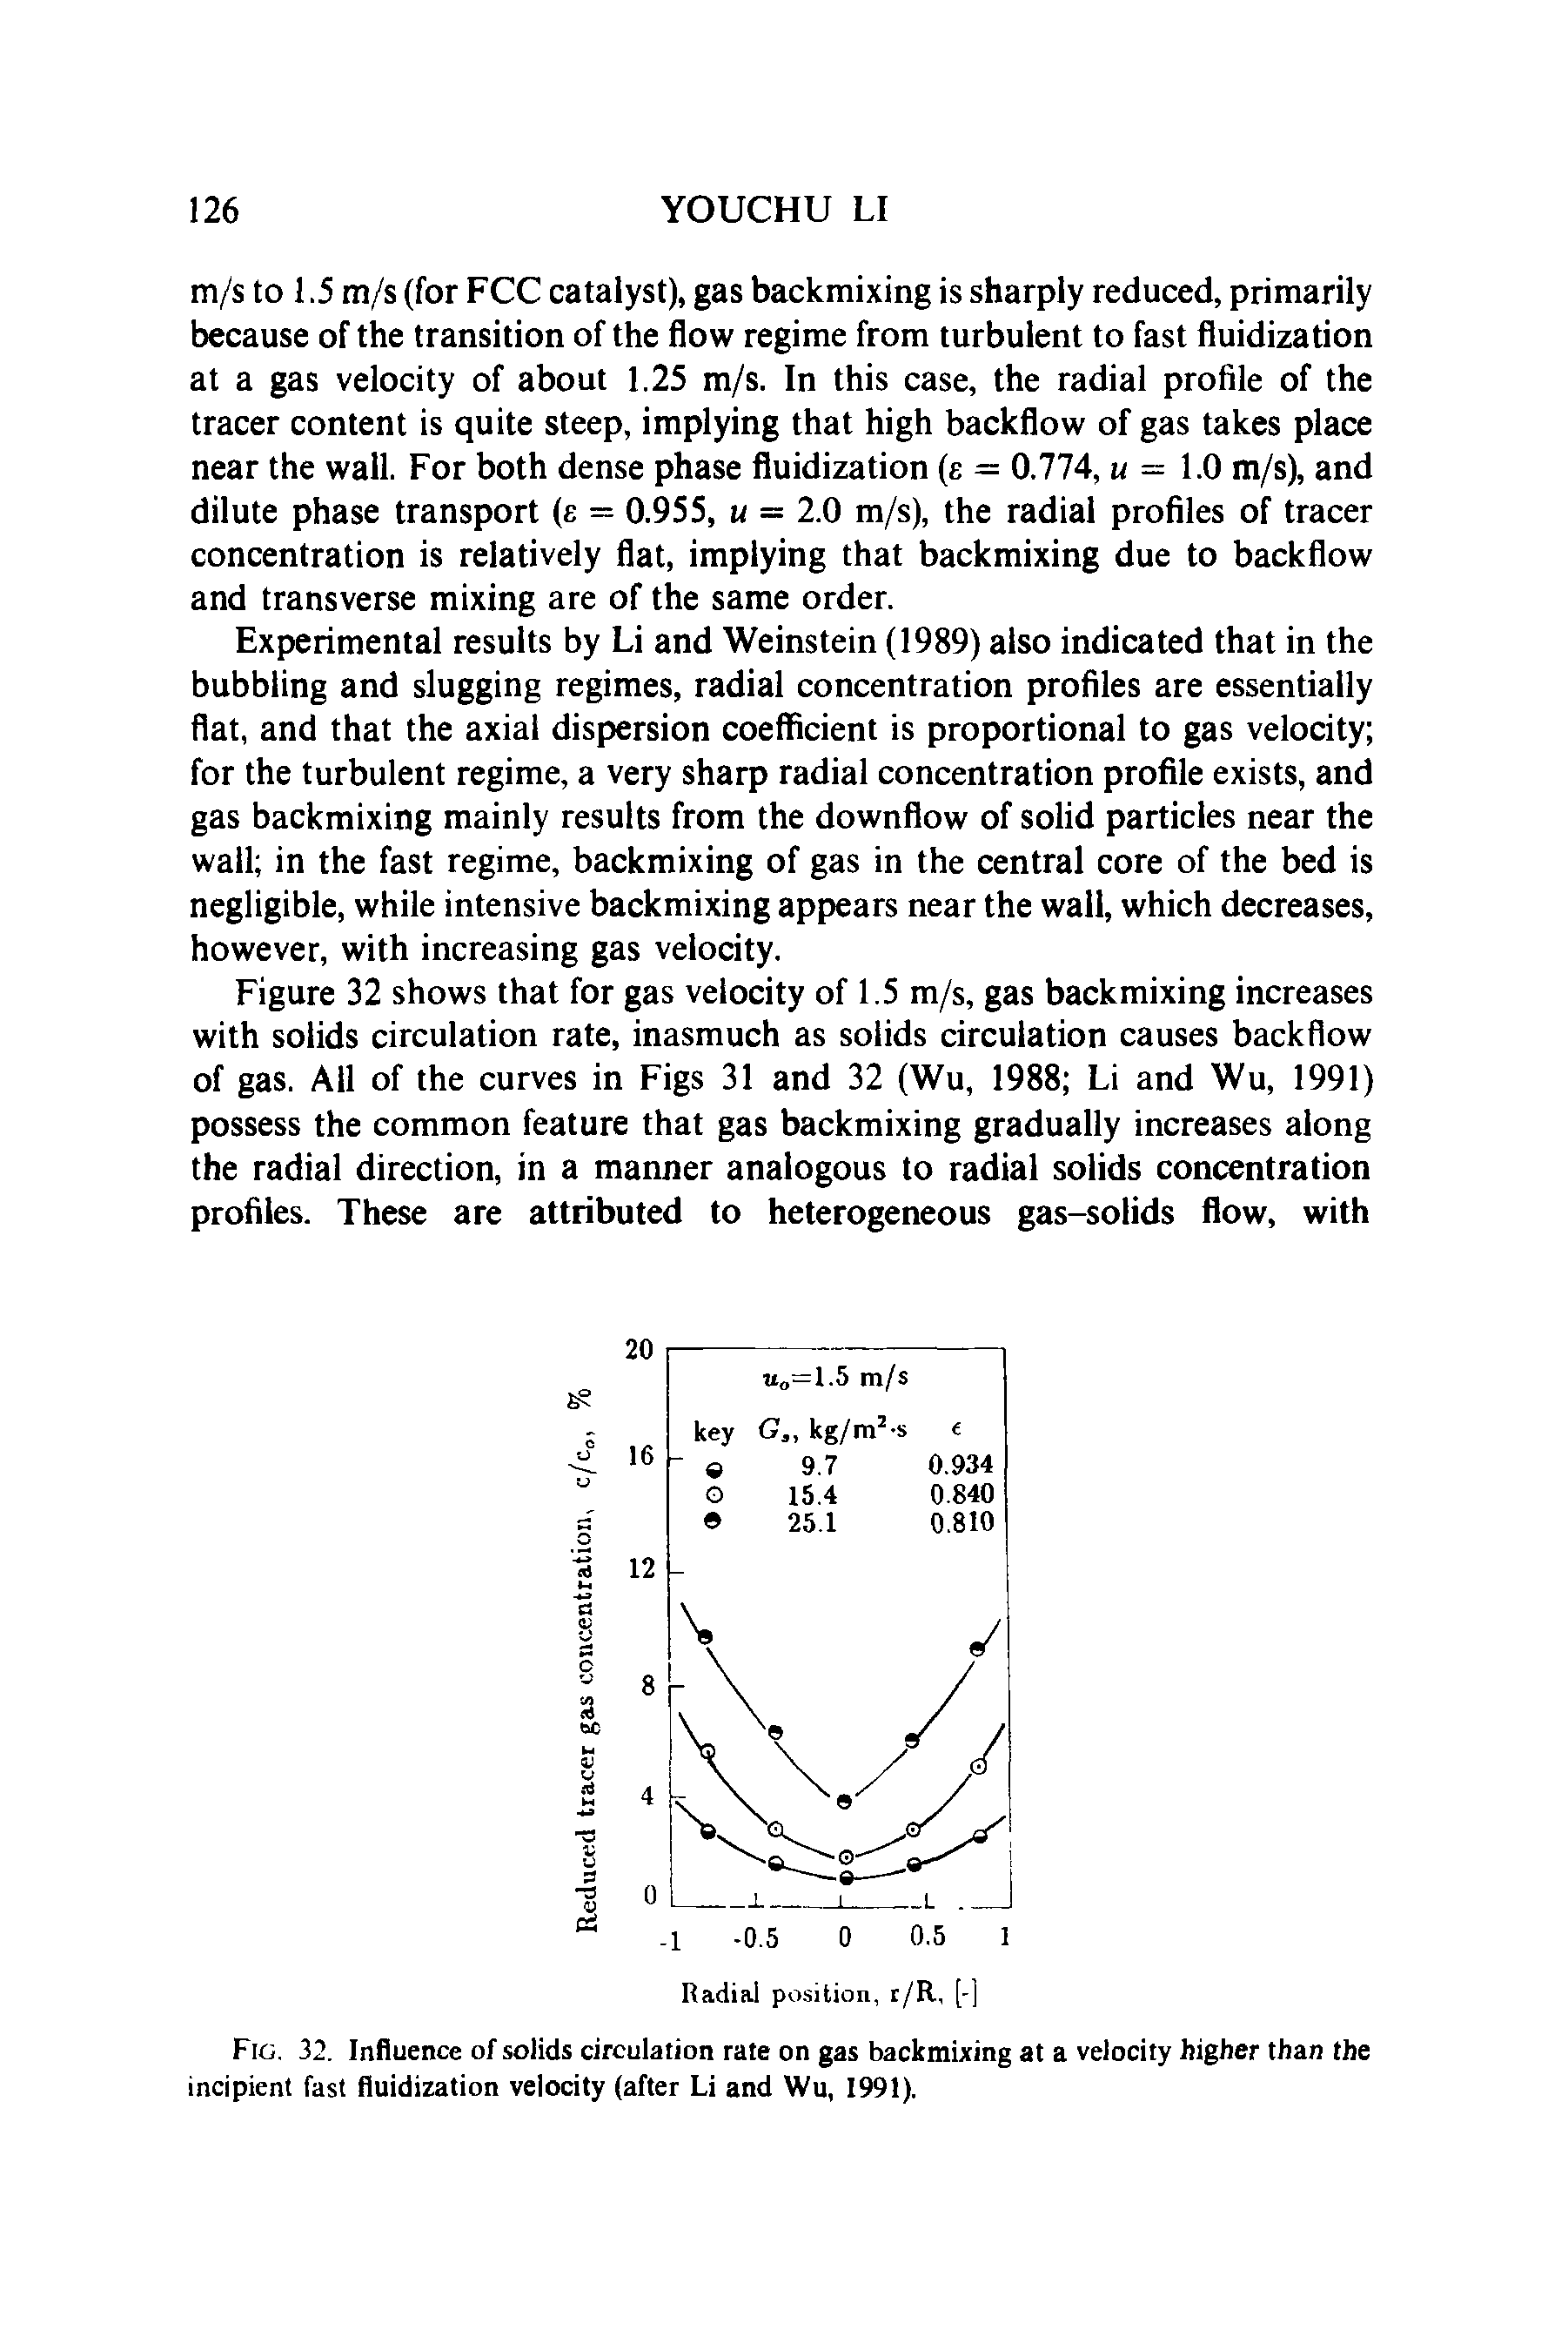 Fig. 32. Influence of solids circulation rate on gas backmixing at a velocity higher than the incipient fast fluidization velocity (after Li and Wu, 1991).